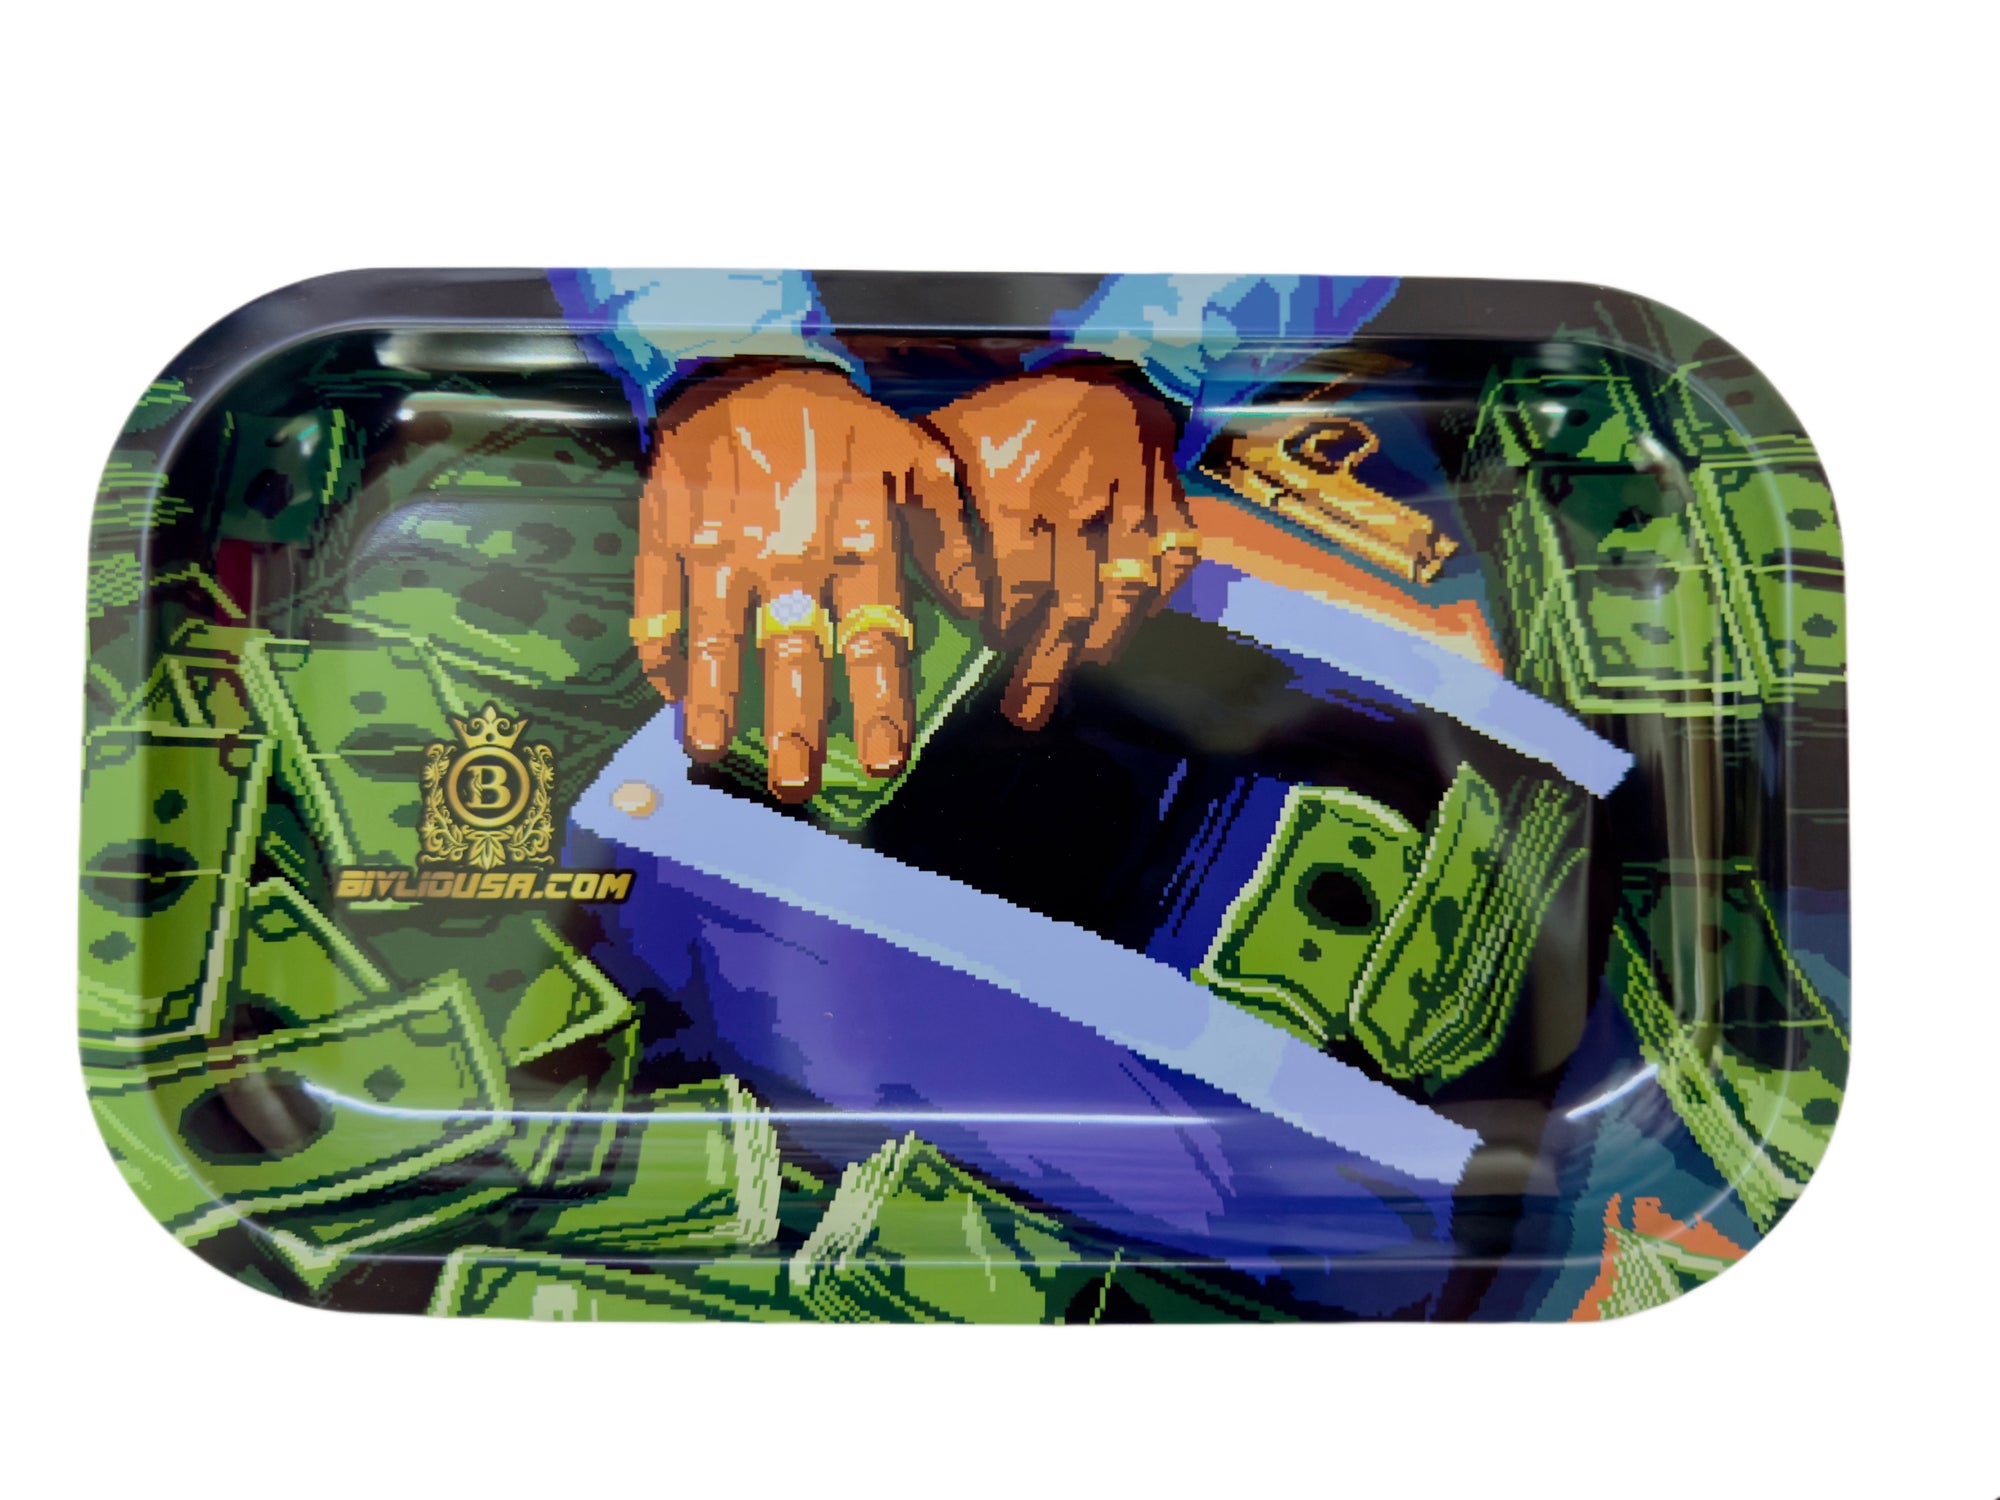 EXCLUSIVE C.R.E.A.M MONEY ROLLING TRAY